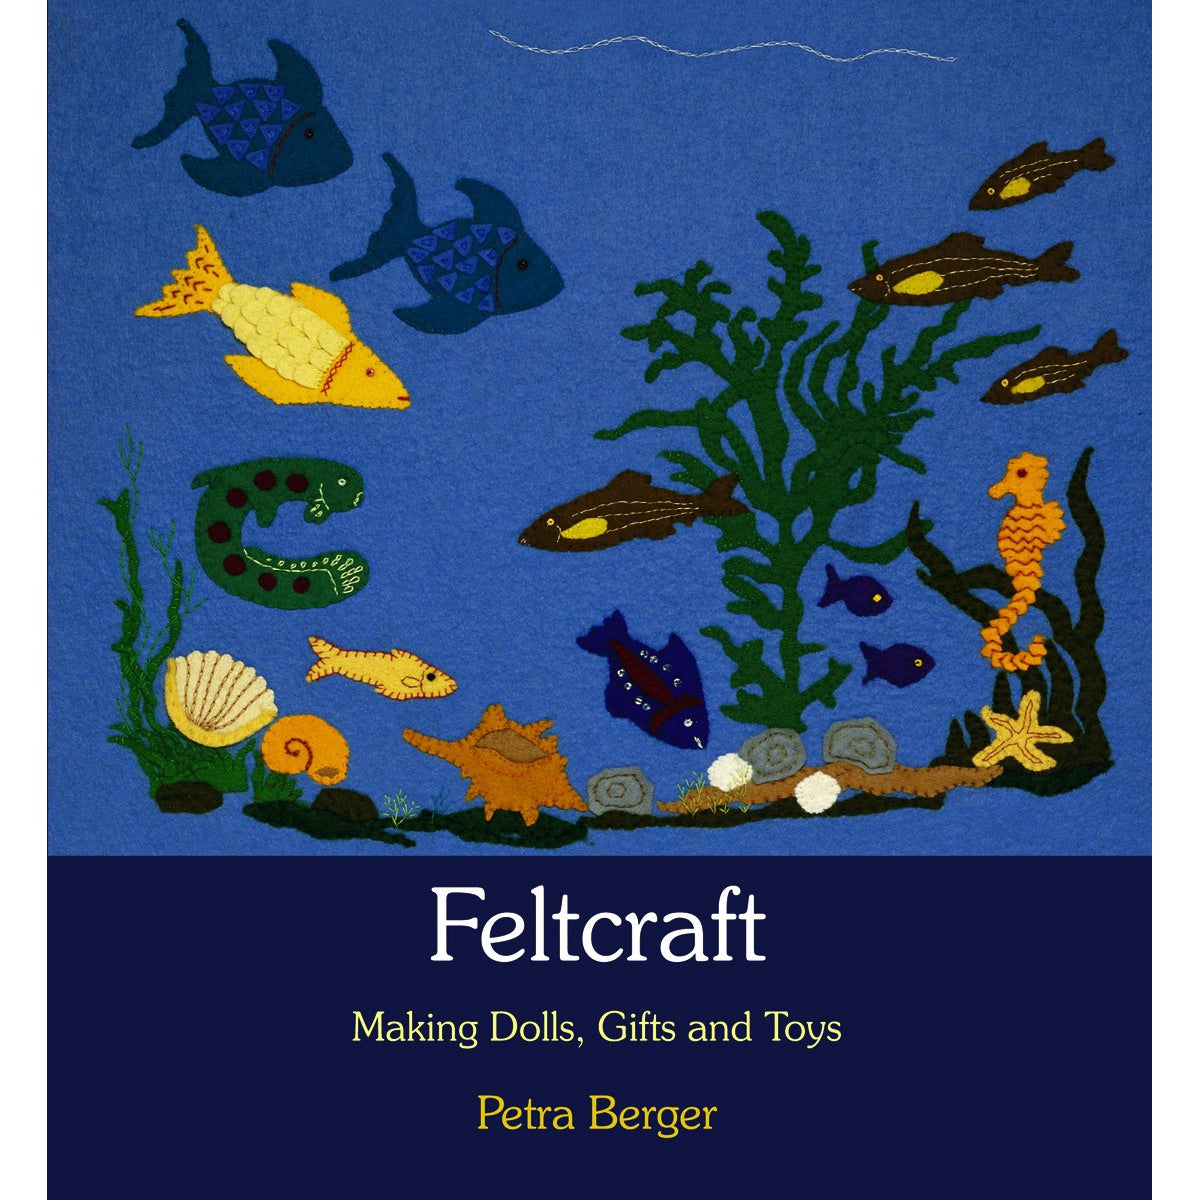 Feltcraft Making Dolls And Gifts And Toys - Petra Berger